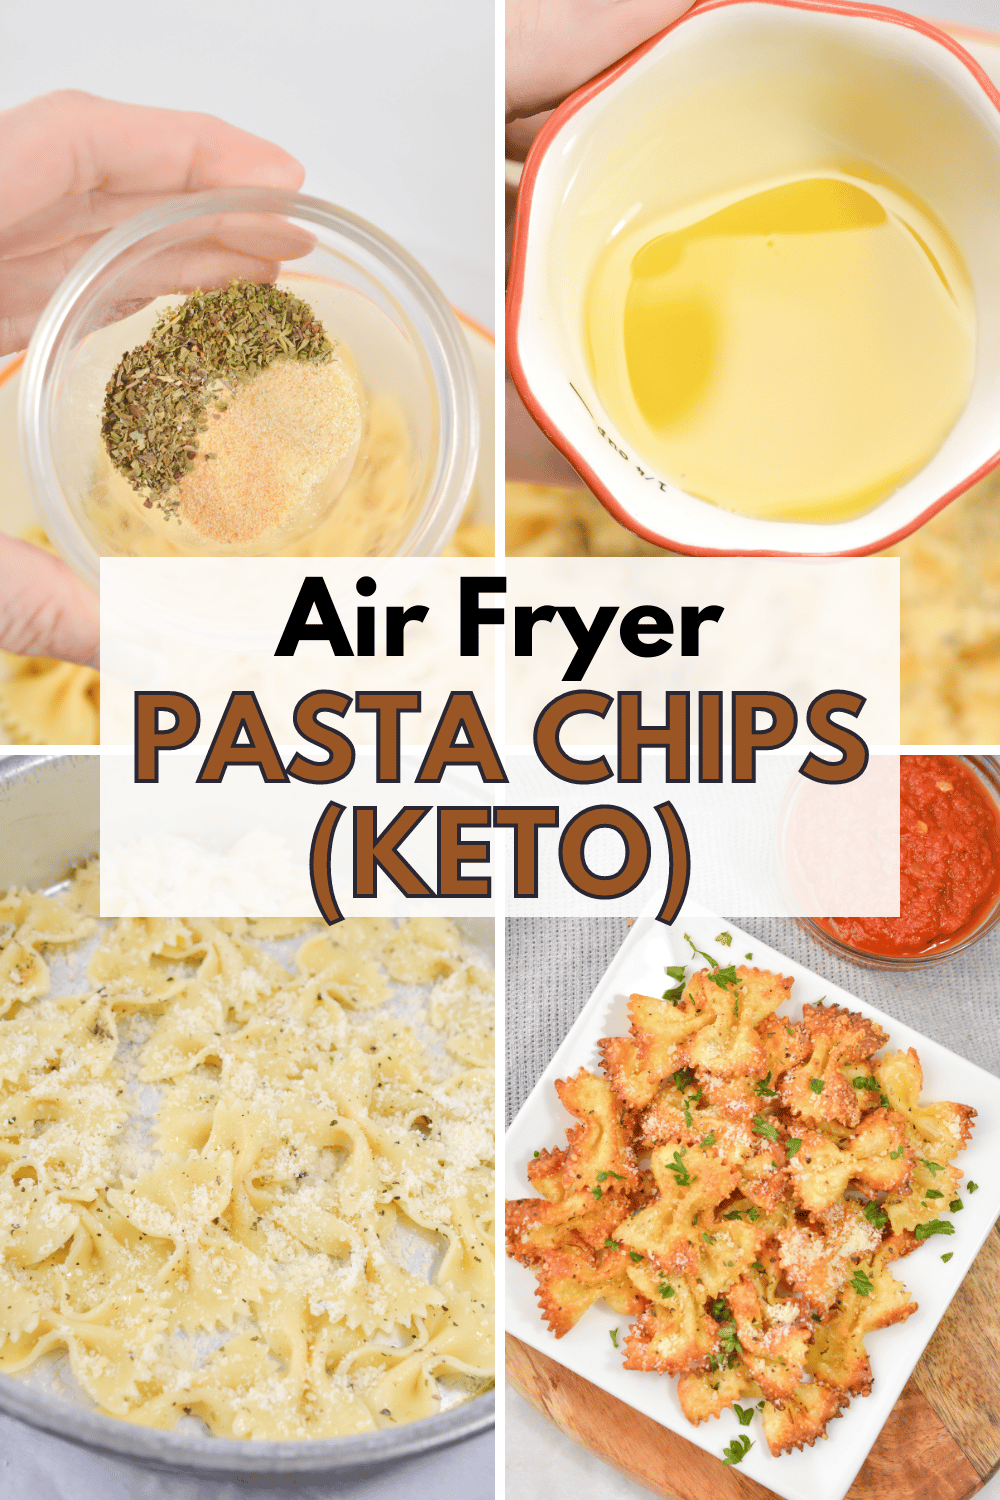 Air Fryer Pasta Chips are the perfect snack! They're crispy, full of flavor, and easy to make. All you need is pasta and some seasonings. #airfryer #airfryerpastachips #pastachips via @wondermomwannab